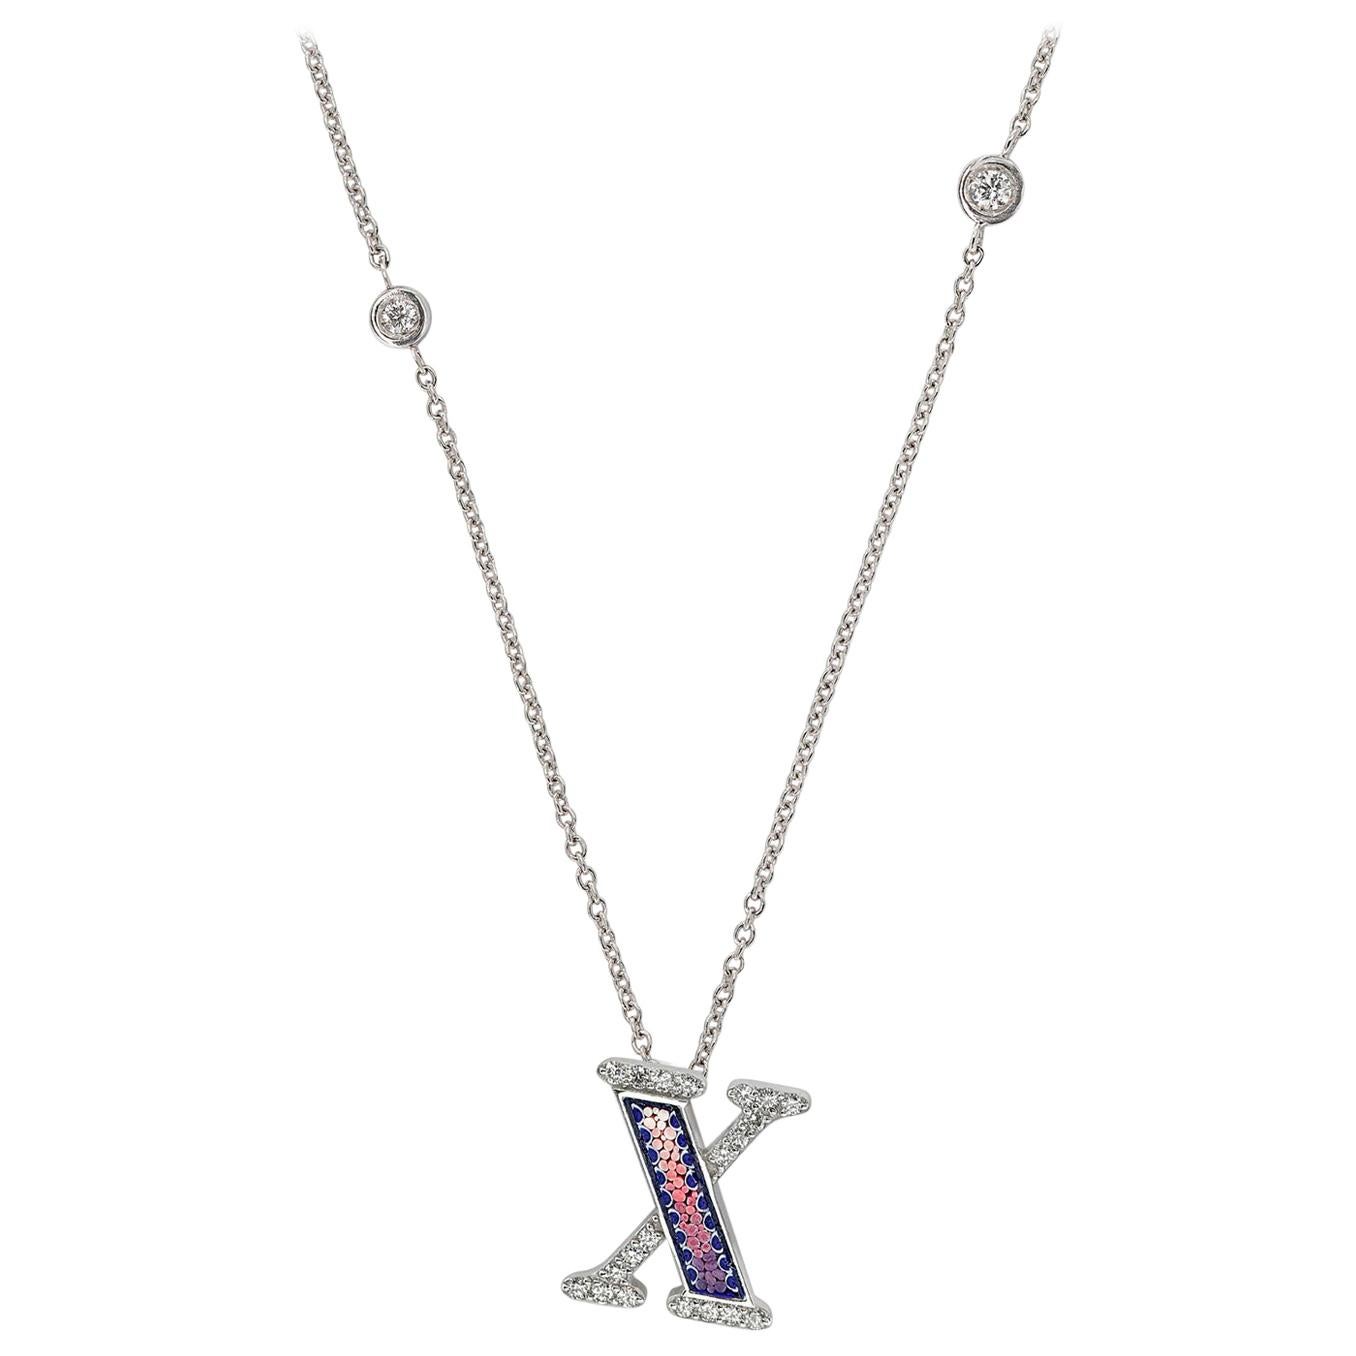 Necklace Letter X White Gold White Diamonds Hand Decorated with Micromosaic